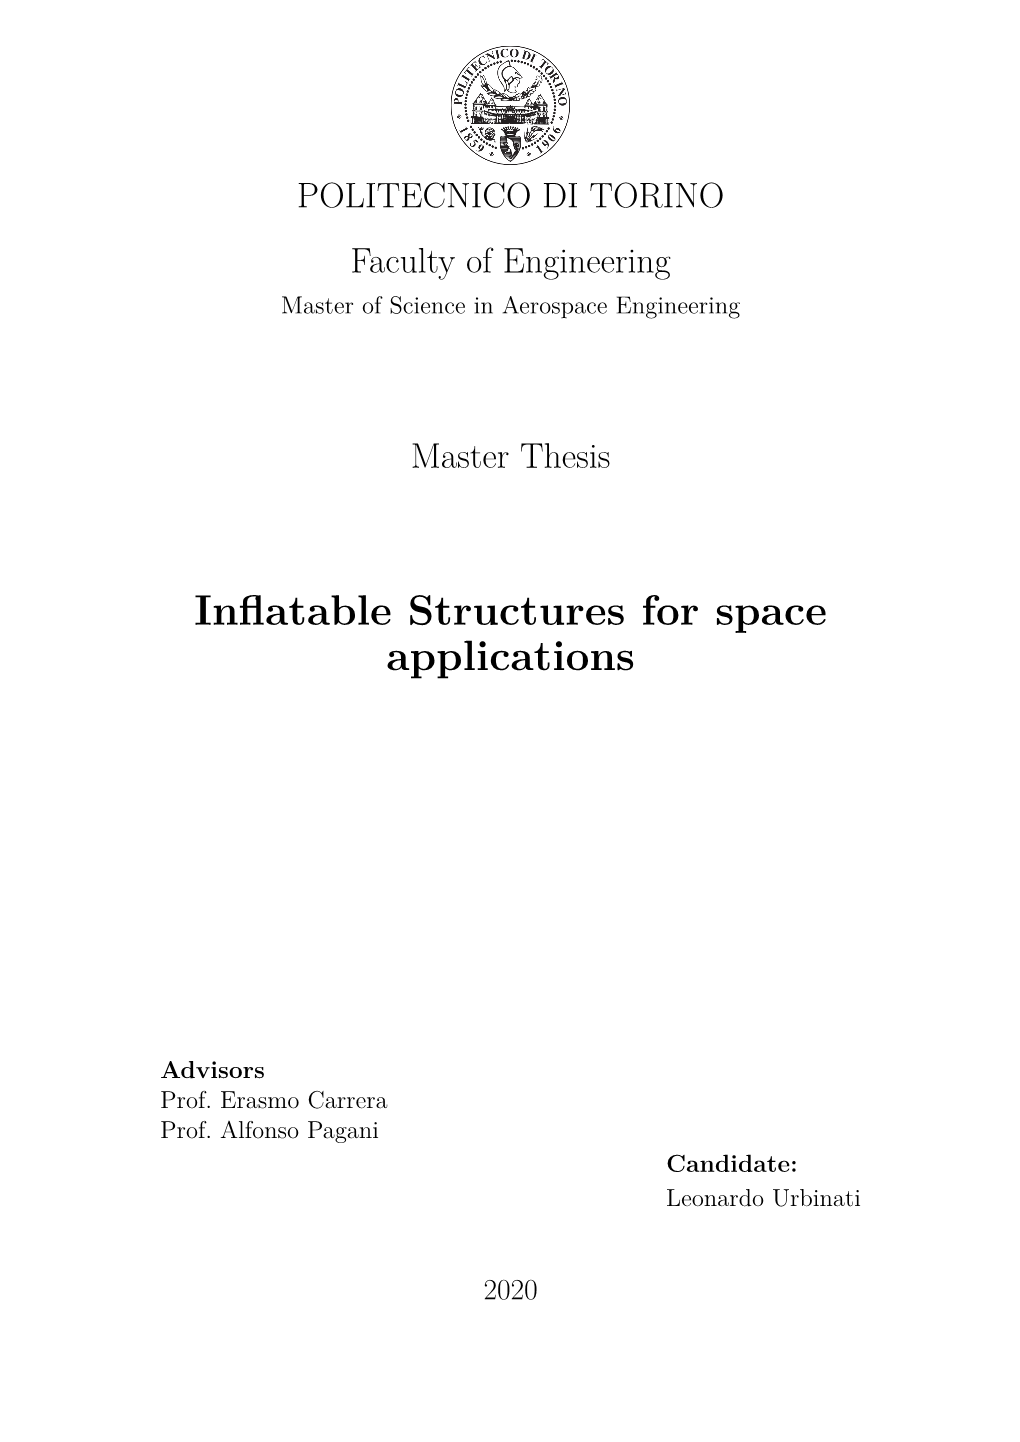 Inflatable Structures for Space Applications